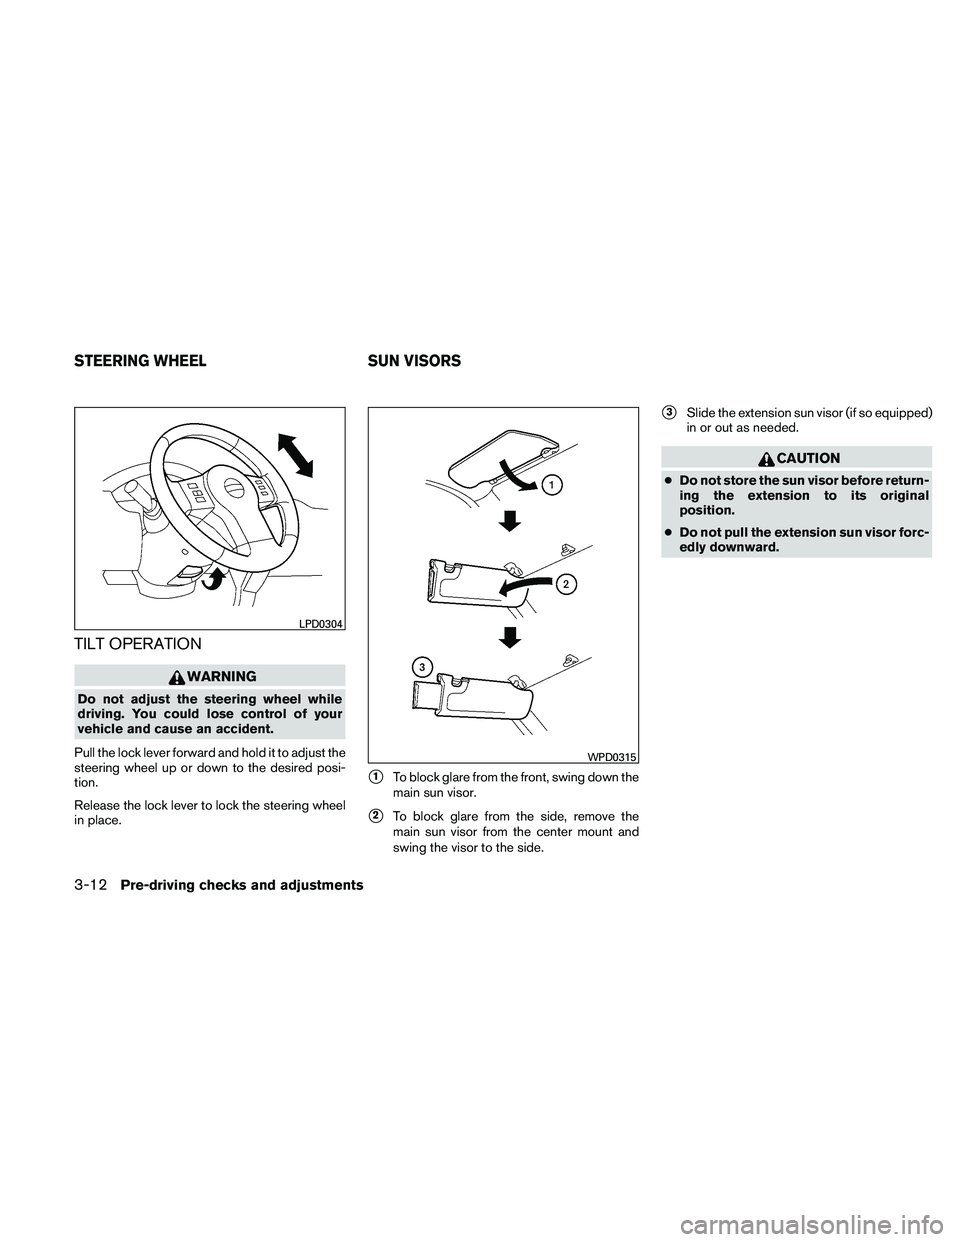 NISSAN XTERRA 2010  Owner´s Manual TILT OPERATION
WARNING
Do not adjust the steering wheel while
driving. You could lose control of your
vehicle and cause an accident.
Pull the lock lever forward and hold it to adjust the
steering whee